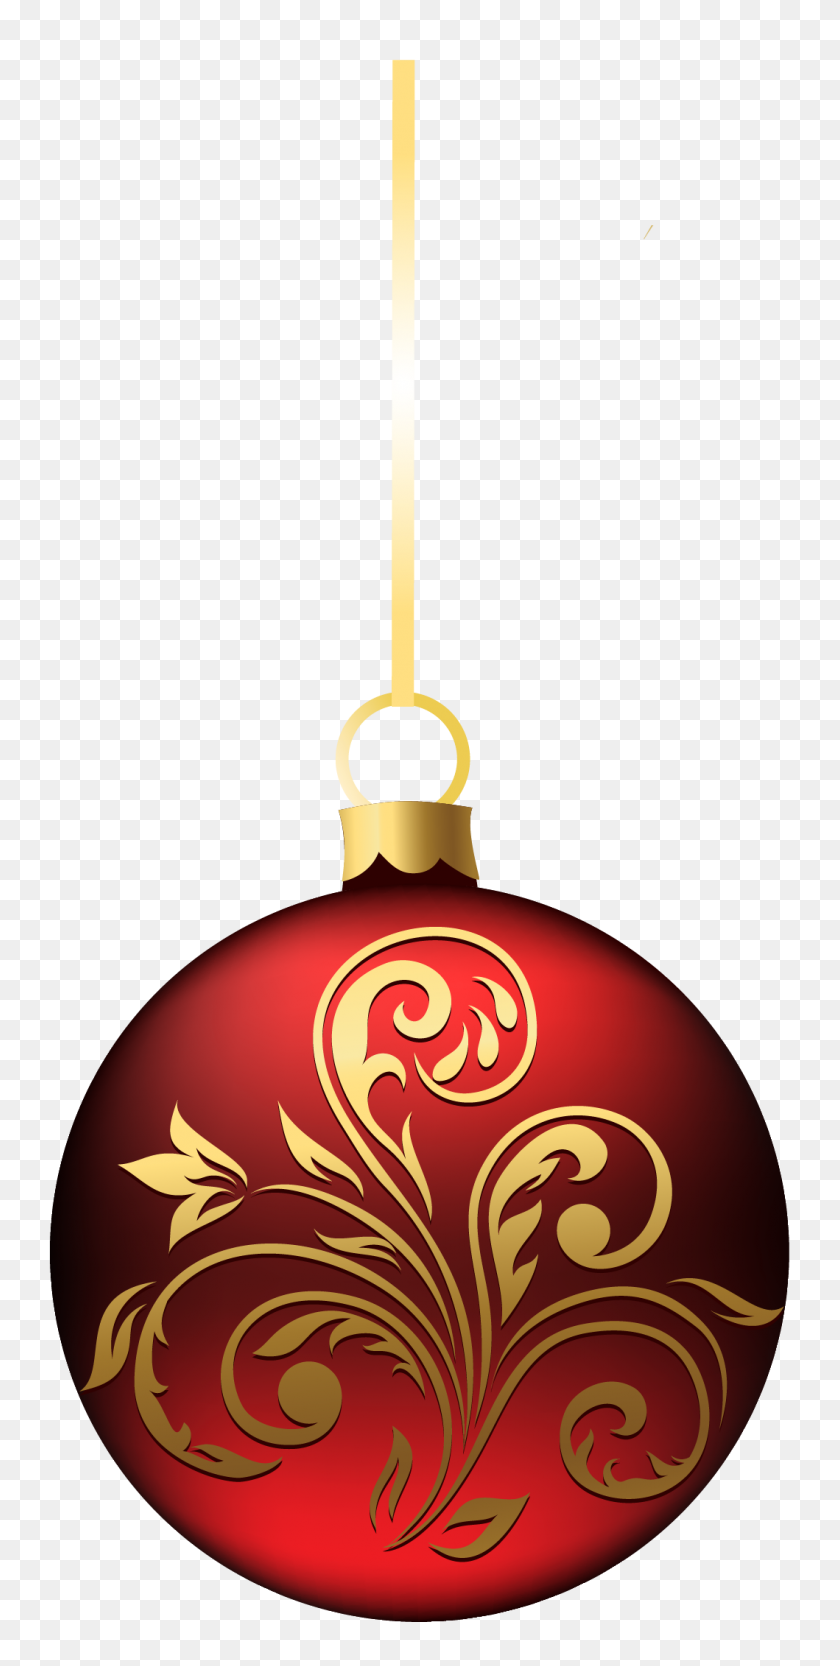 1059x2181 Large Transparent Bluered Christmas Ball Ornament Png Clipart - Ornament PNG